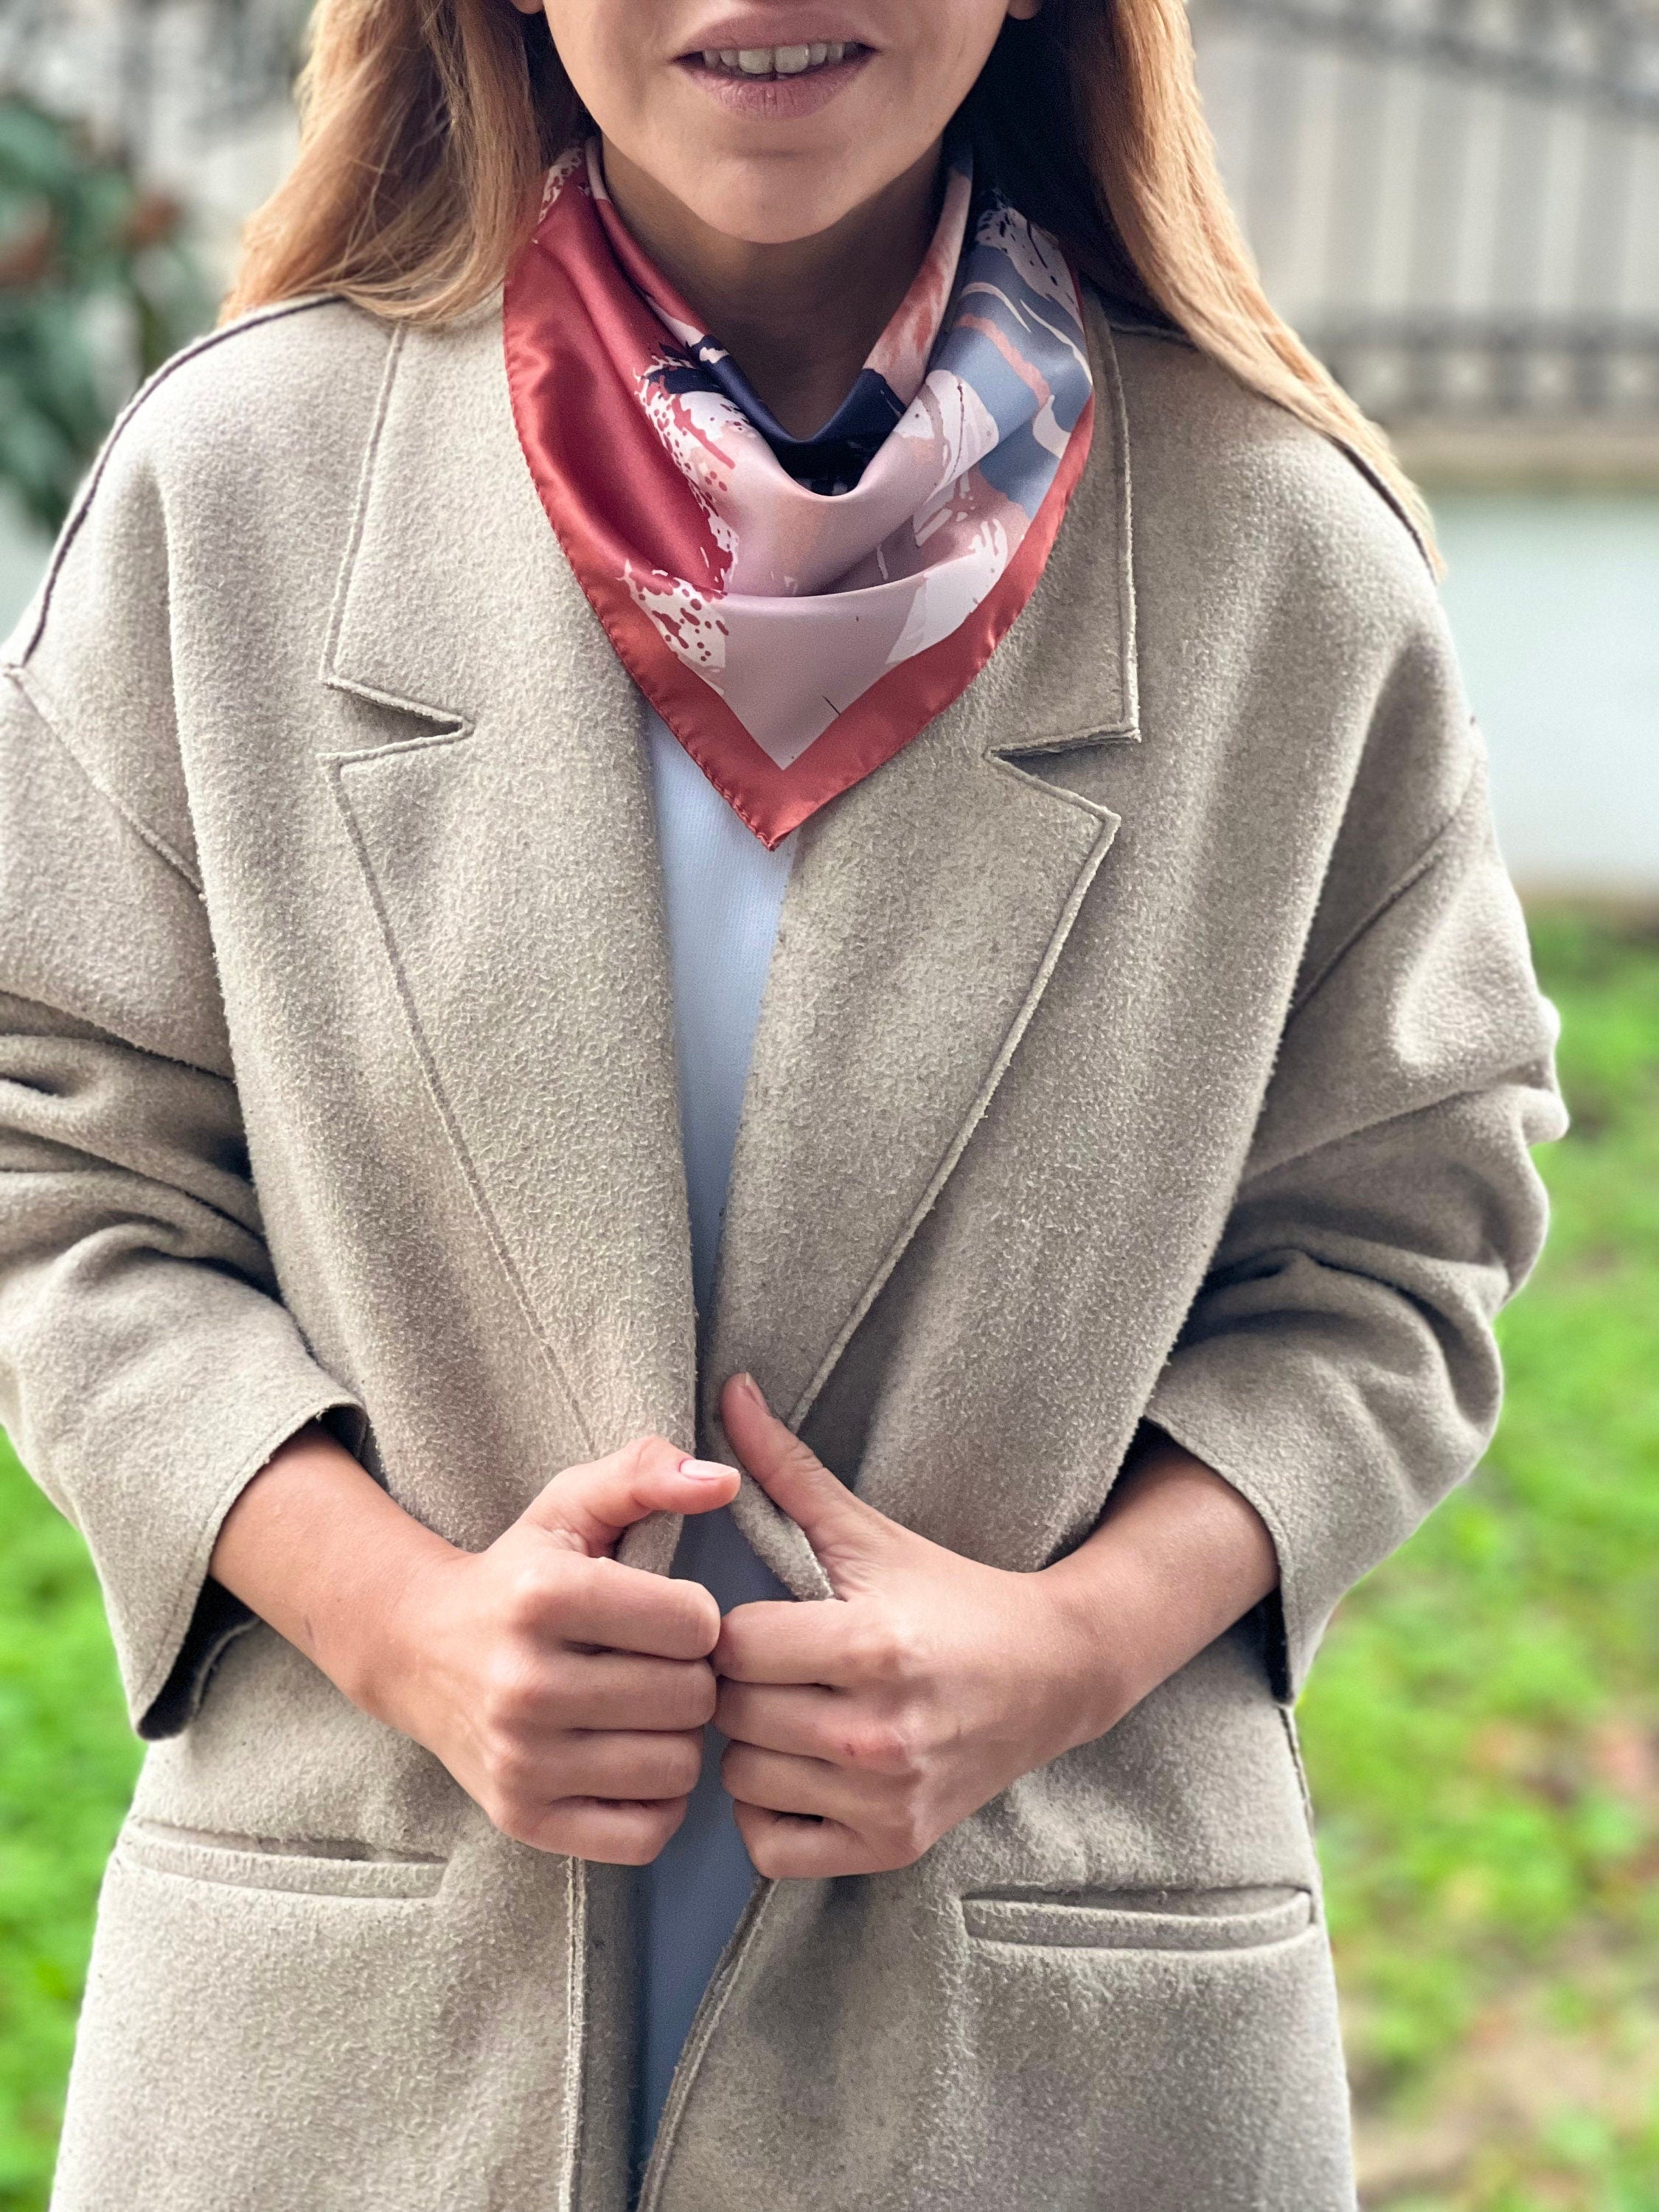 Stay stylish all winter long with our range of stylish accessories, made from the finest materials. From gift bows to neck scarves, we have got everything you need to keep your style on point.